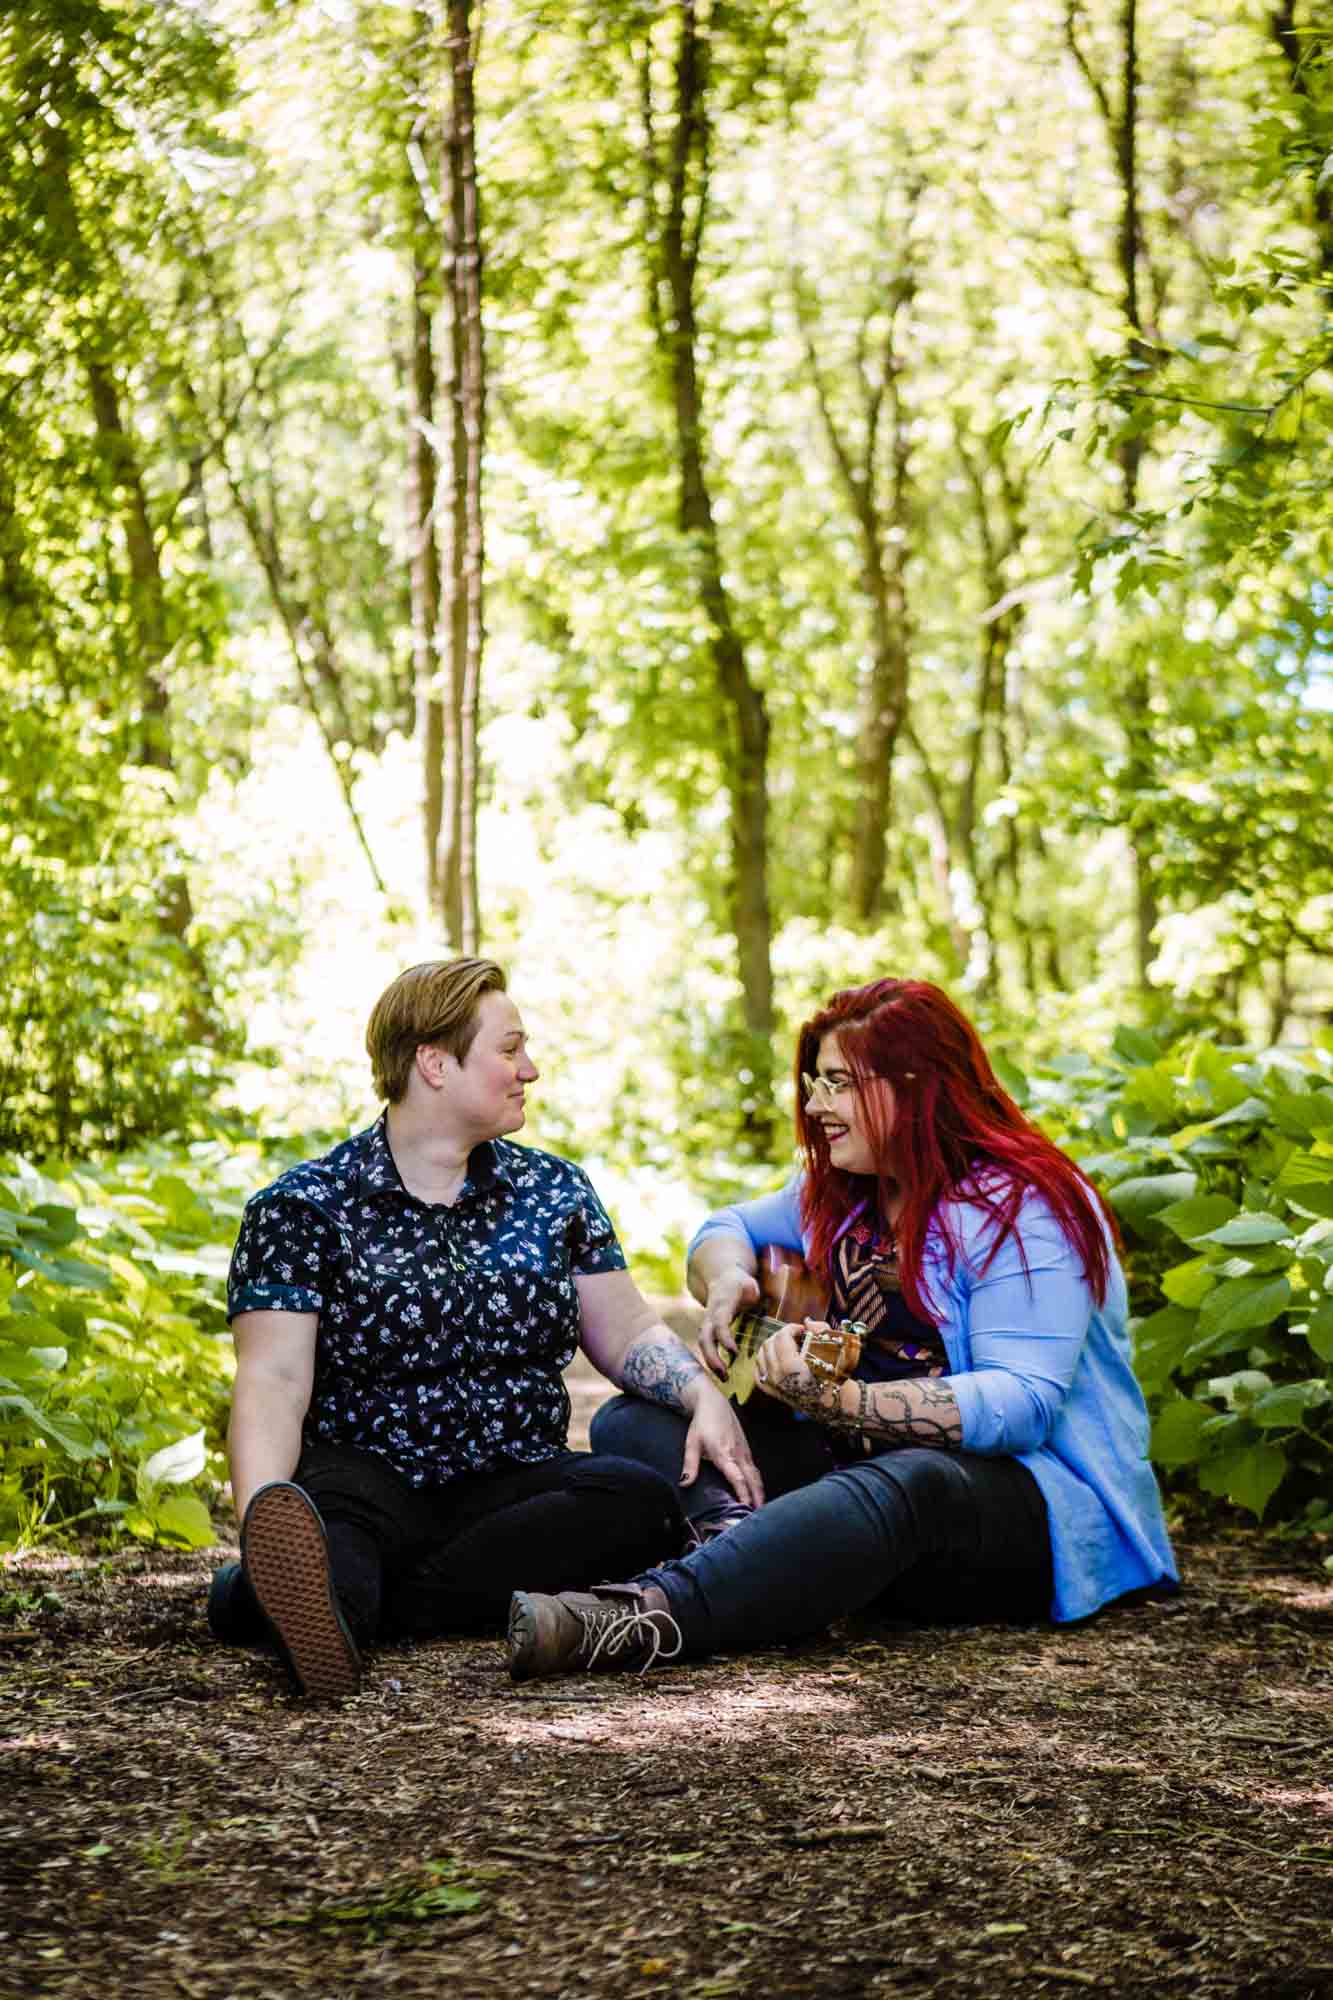 Heartwarming surprise double proposal with ukulele serenade | Stardust Photography | Featured on Equally Wed, the leading LGBTQ+ wedding magazine